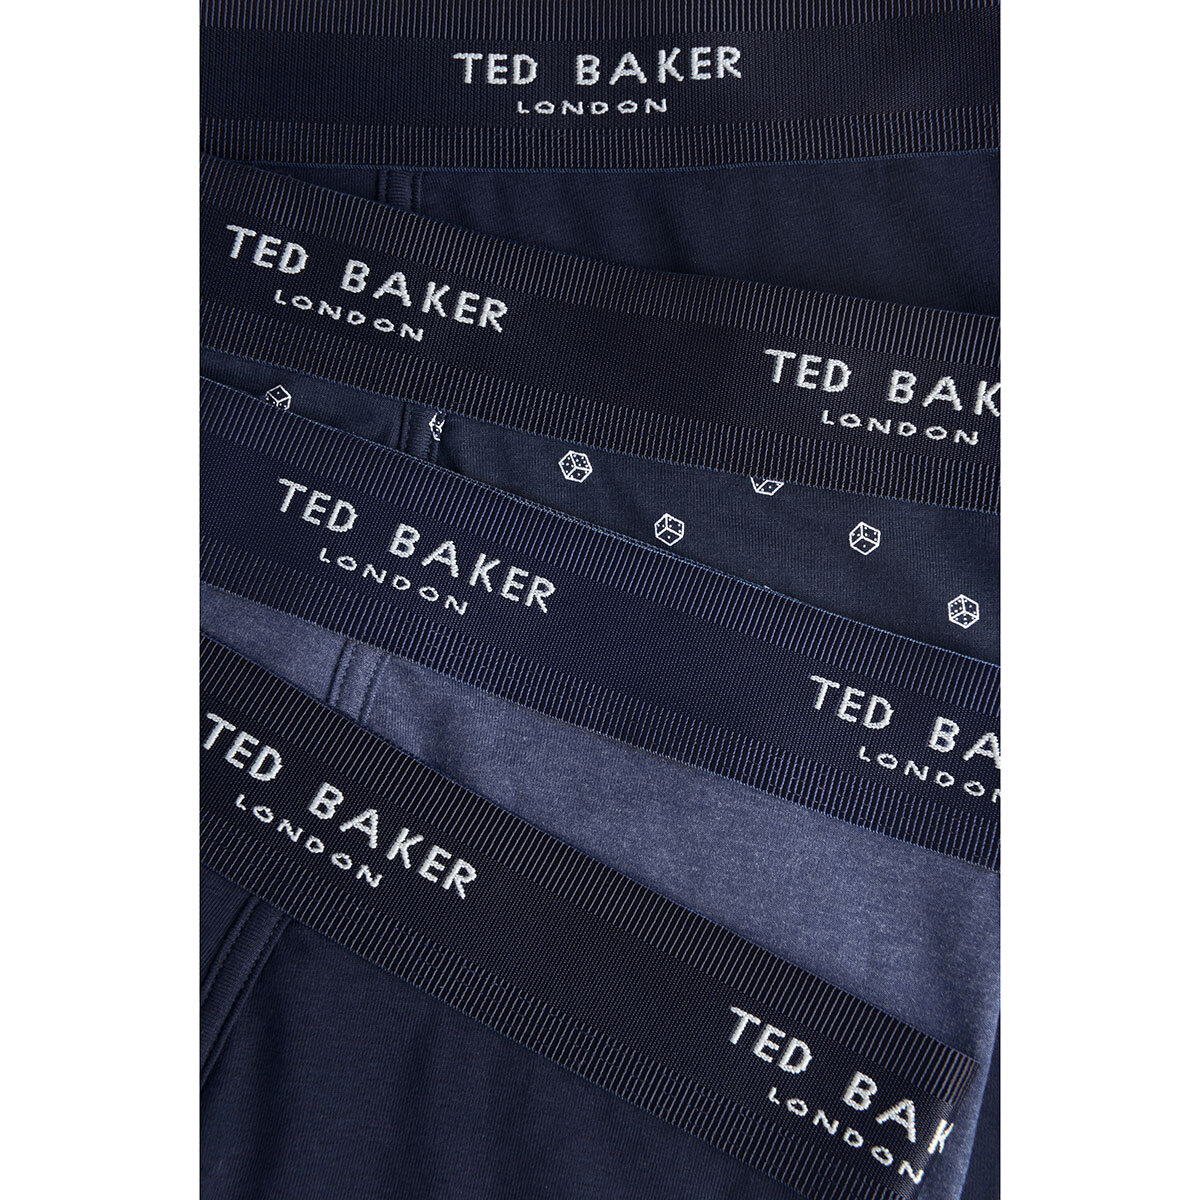 Ted Baker Men's Boxer Shorts, 4 Pack in Navy, Extra Large